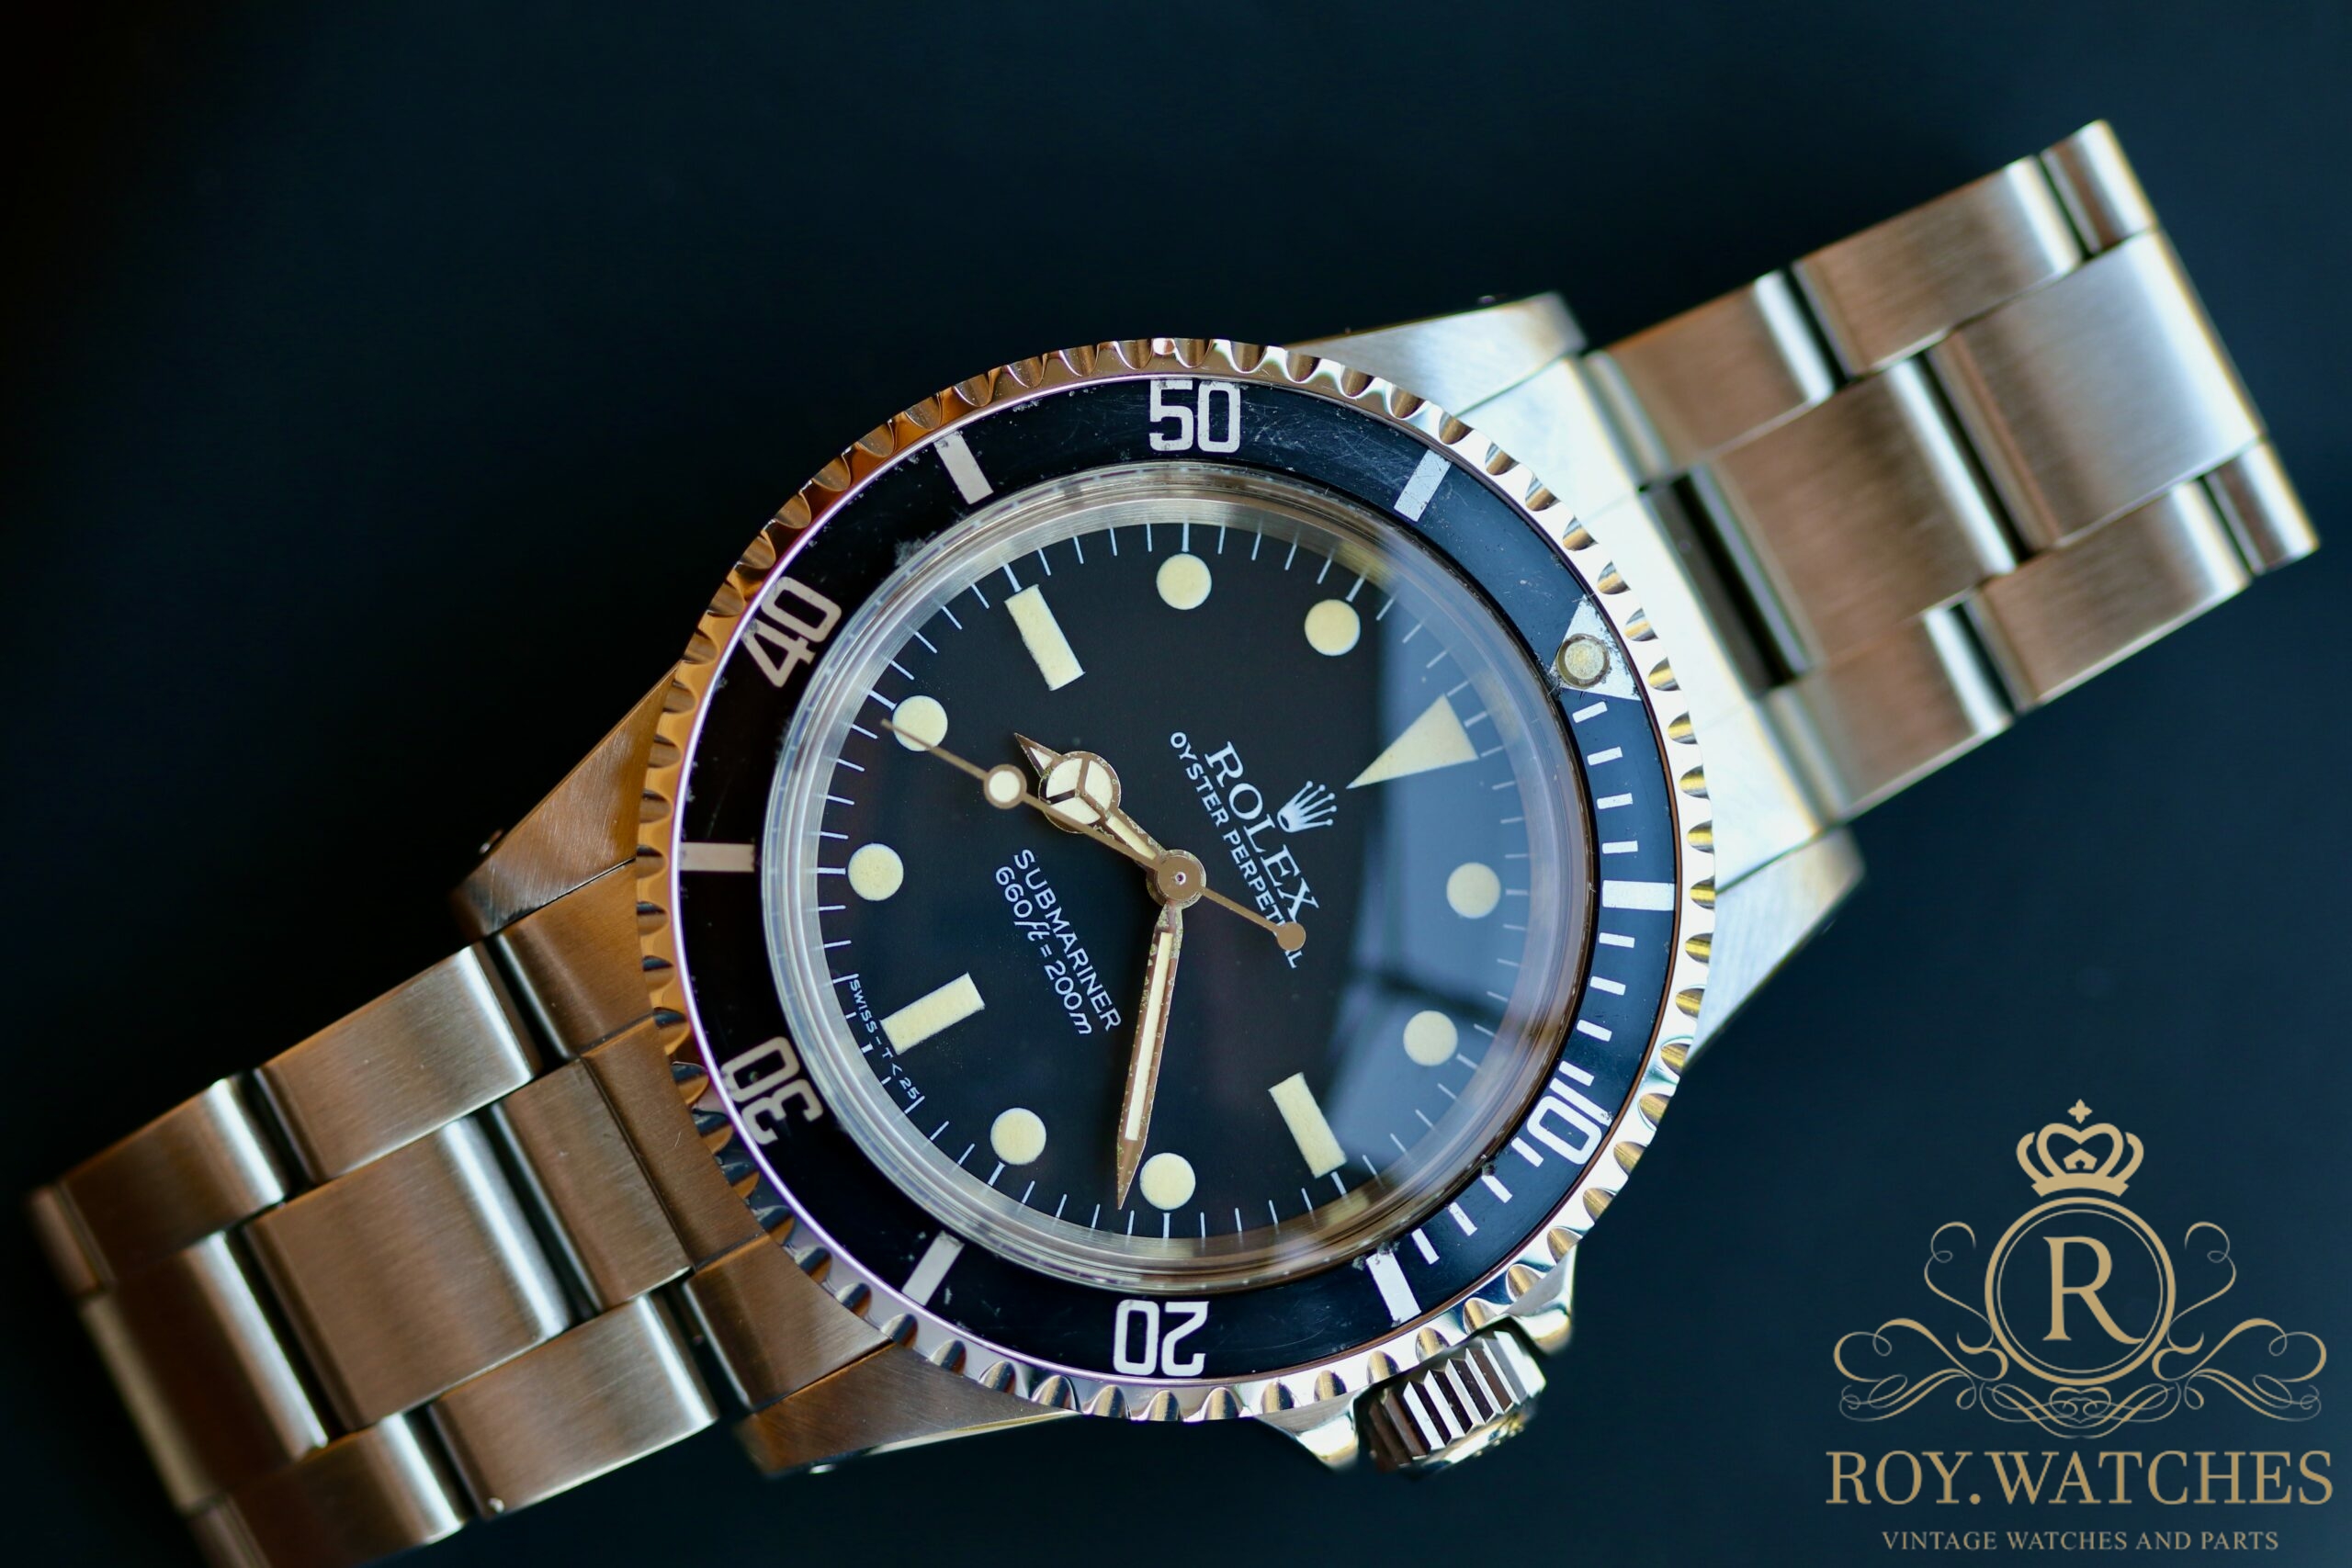 ROLEX SUBMARINER - Roy Watches | Vintage Watches and Parts